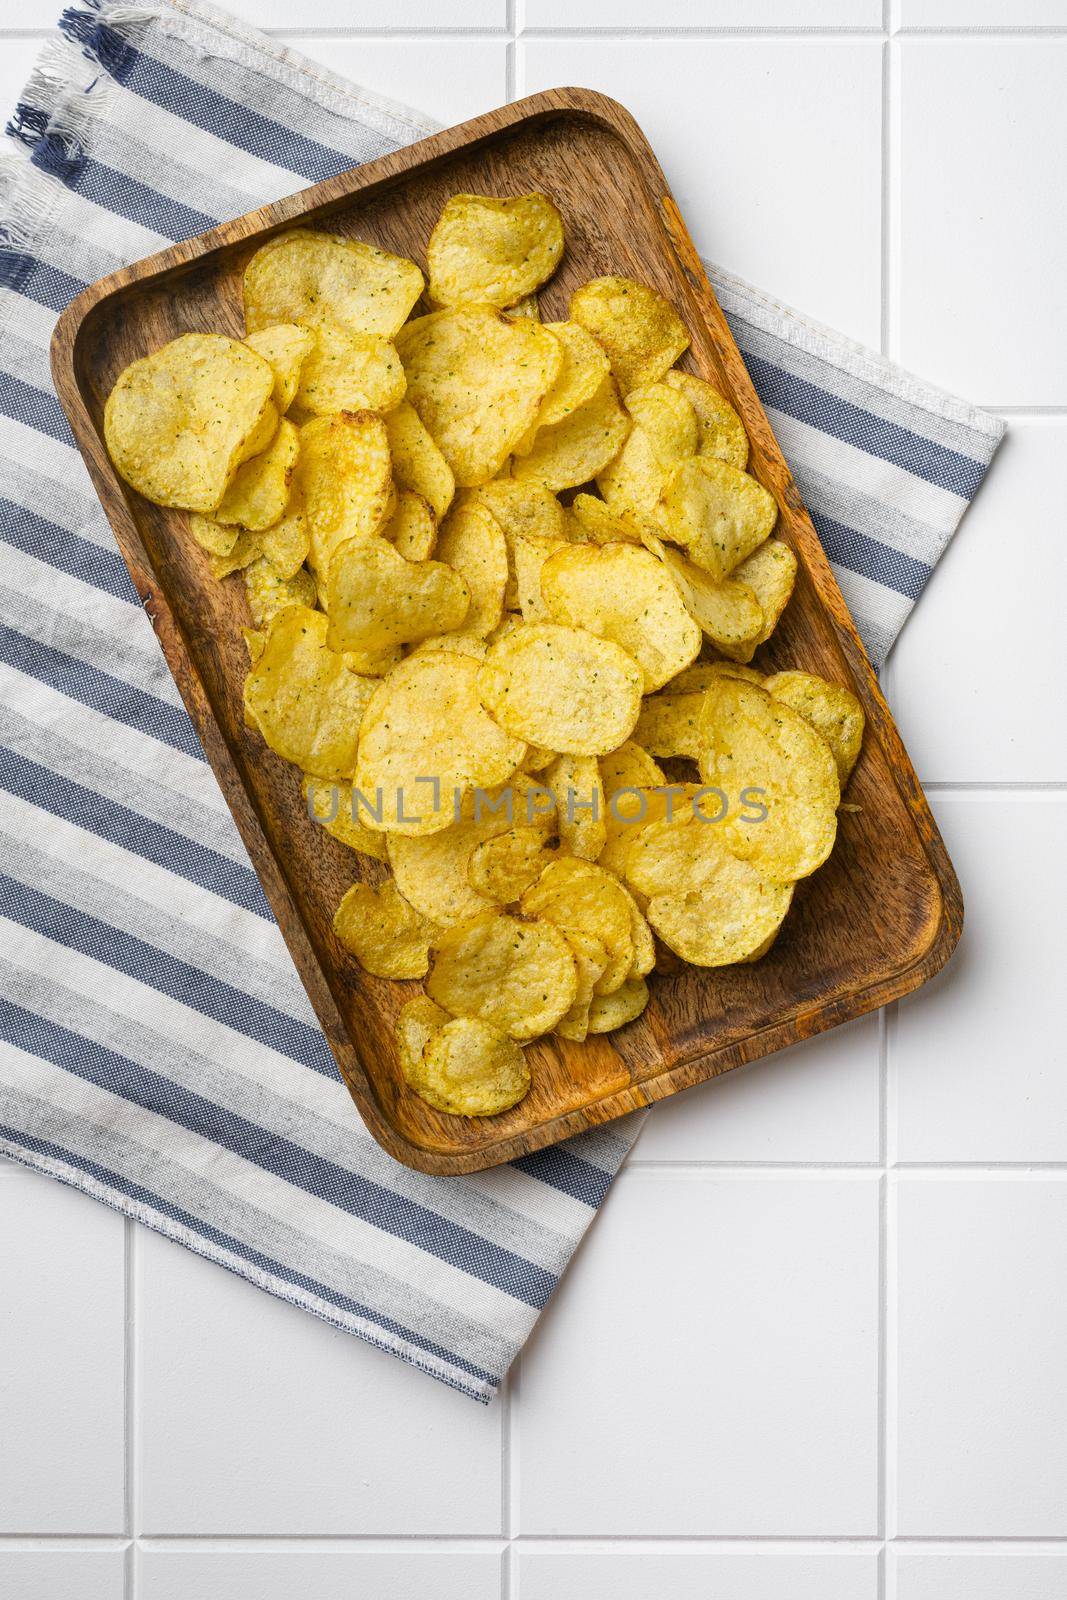 Root Classic potato chips on white ceramic squared tile table background, top view flat lay by Ilianesolenyi